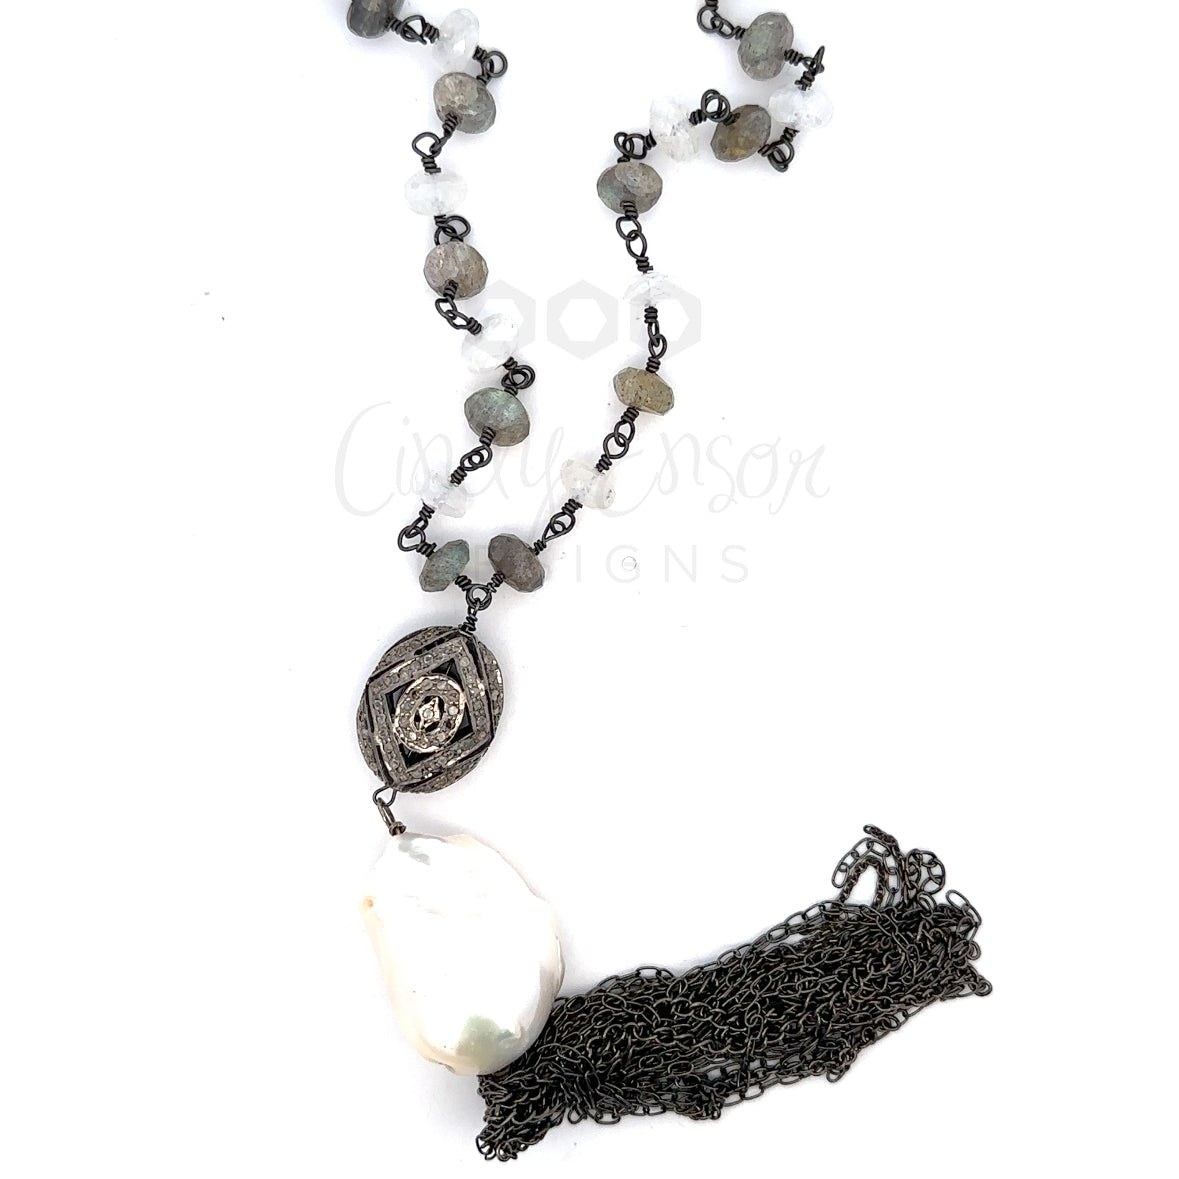 Labradorite and Moonstone Necklace with Pave Bead, Baroque Pearl and Tassel